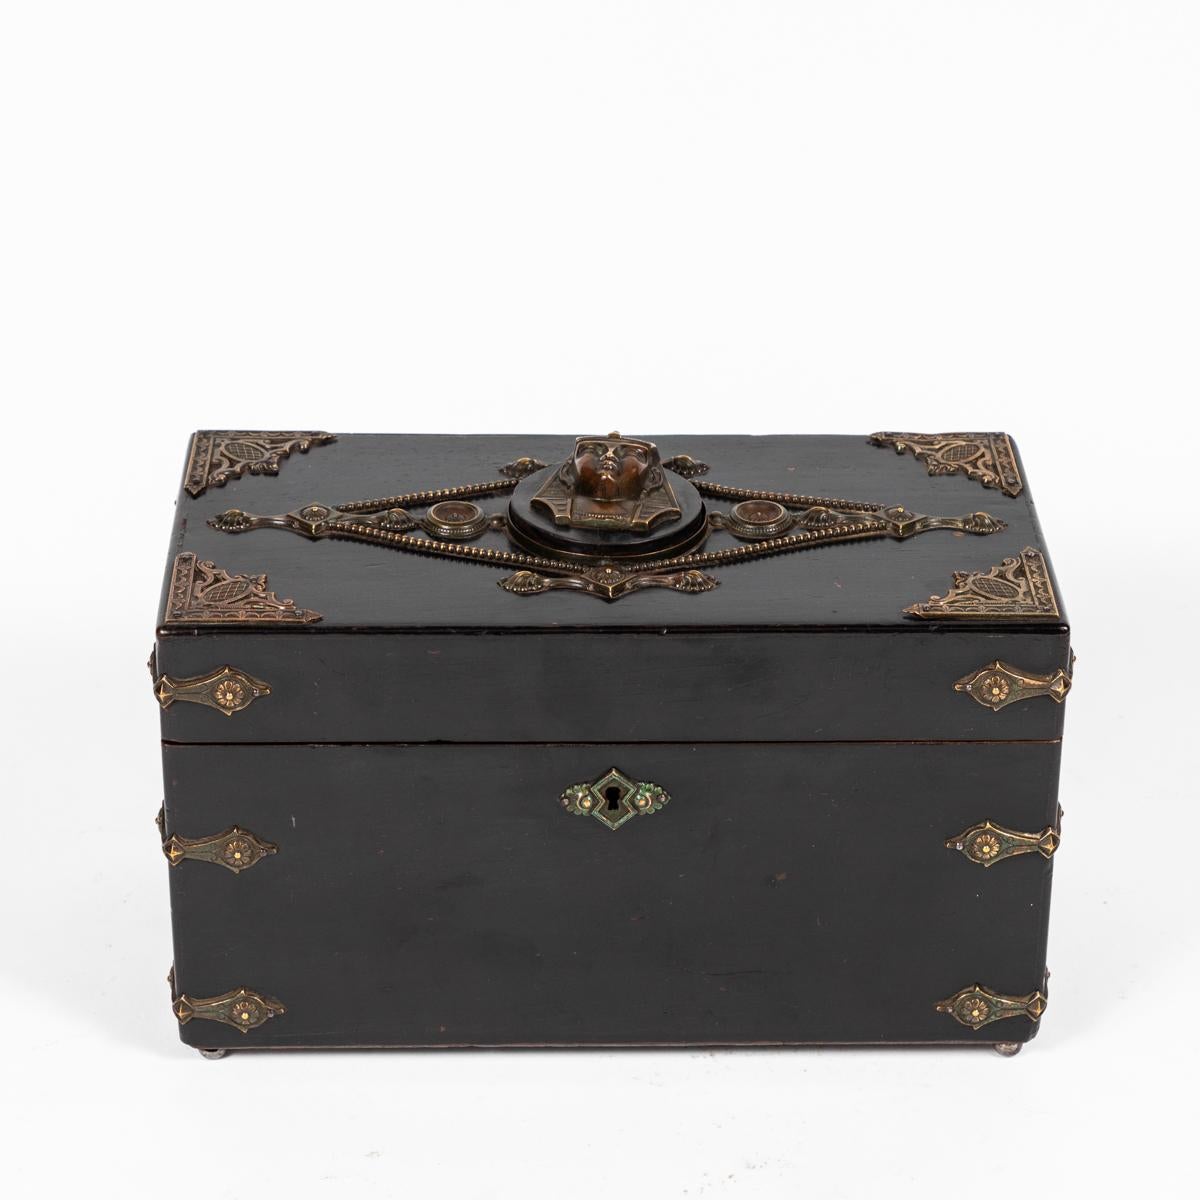 An ebonized and decorated box, originating in France, circa 1830.